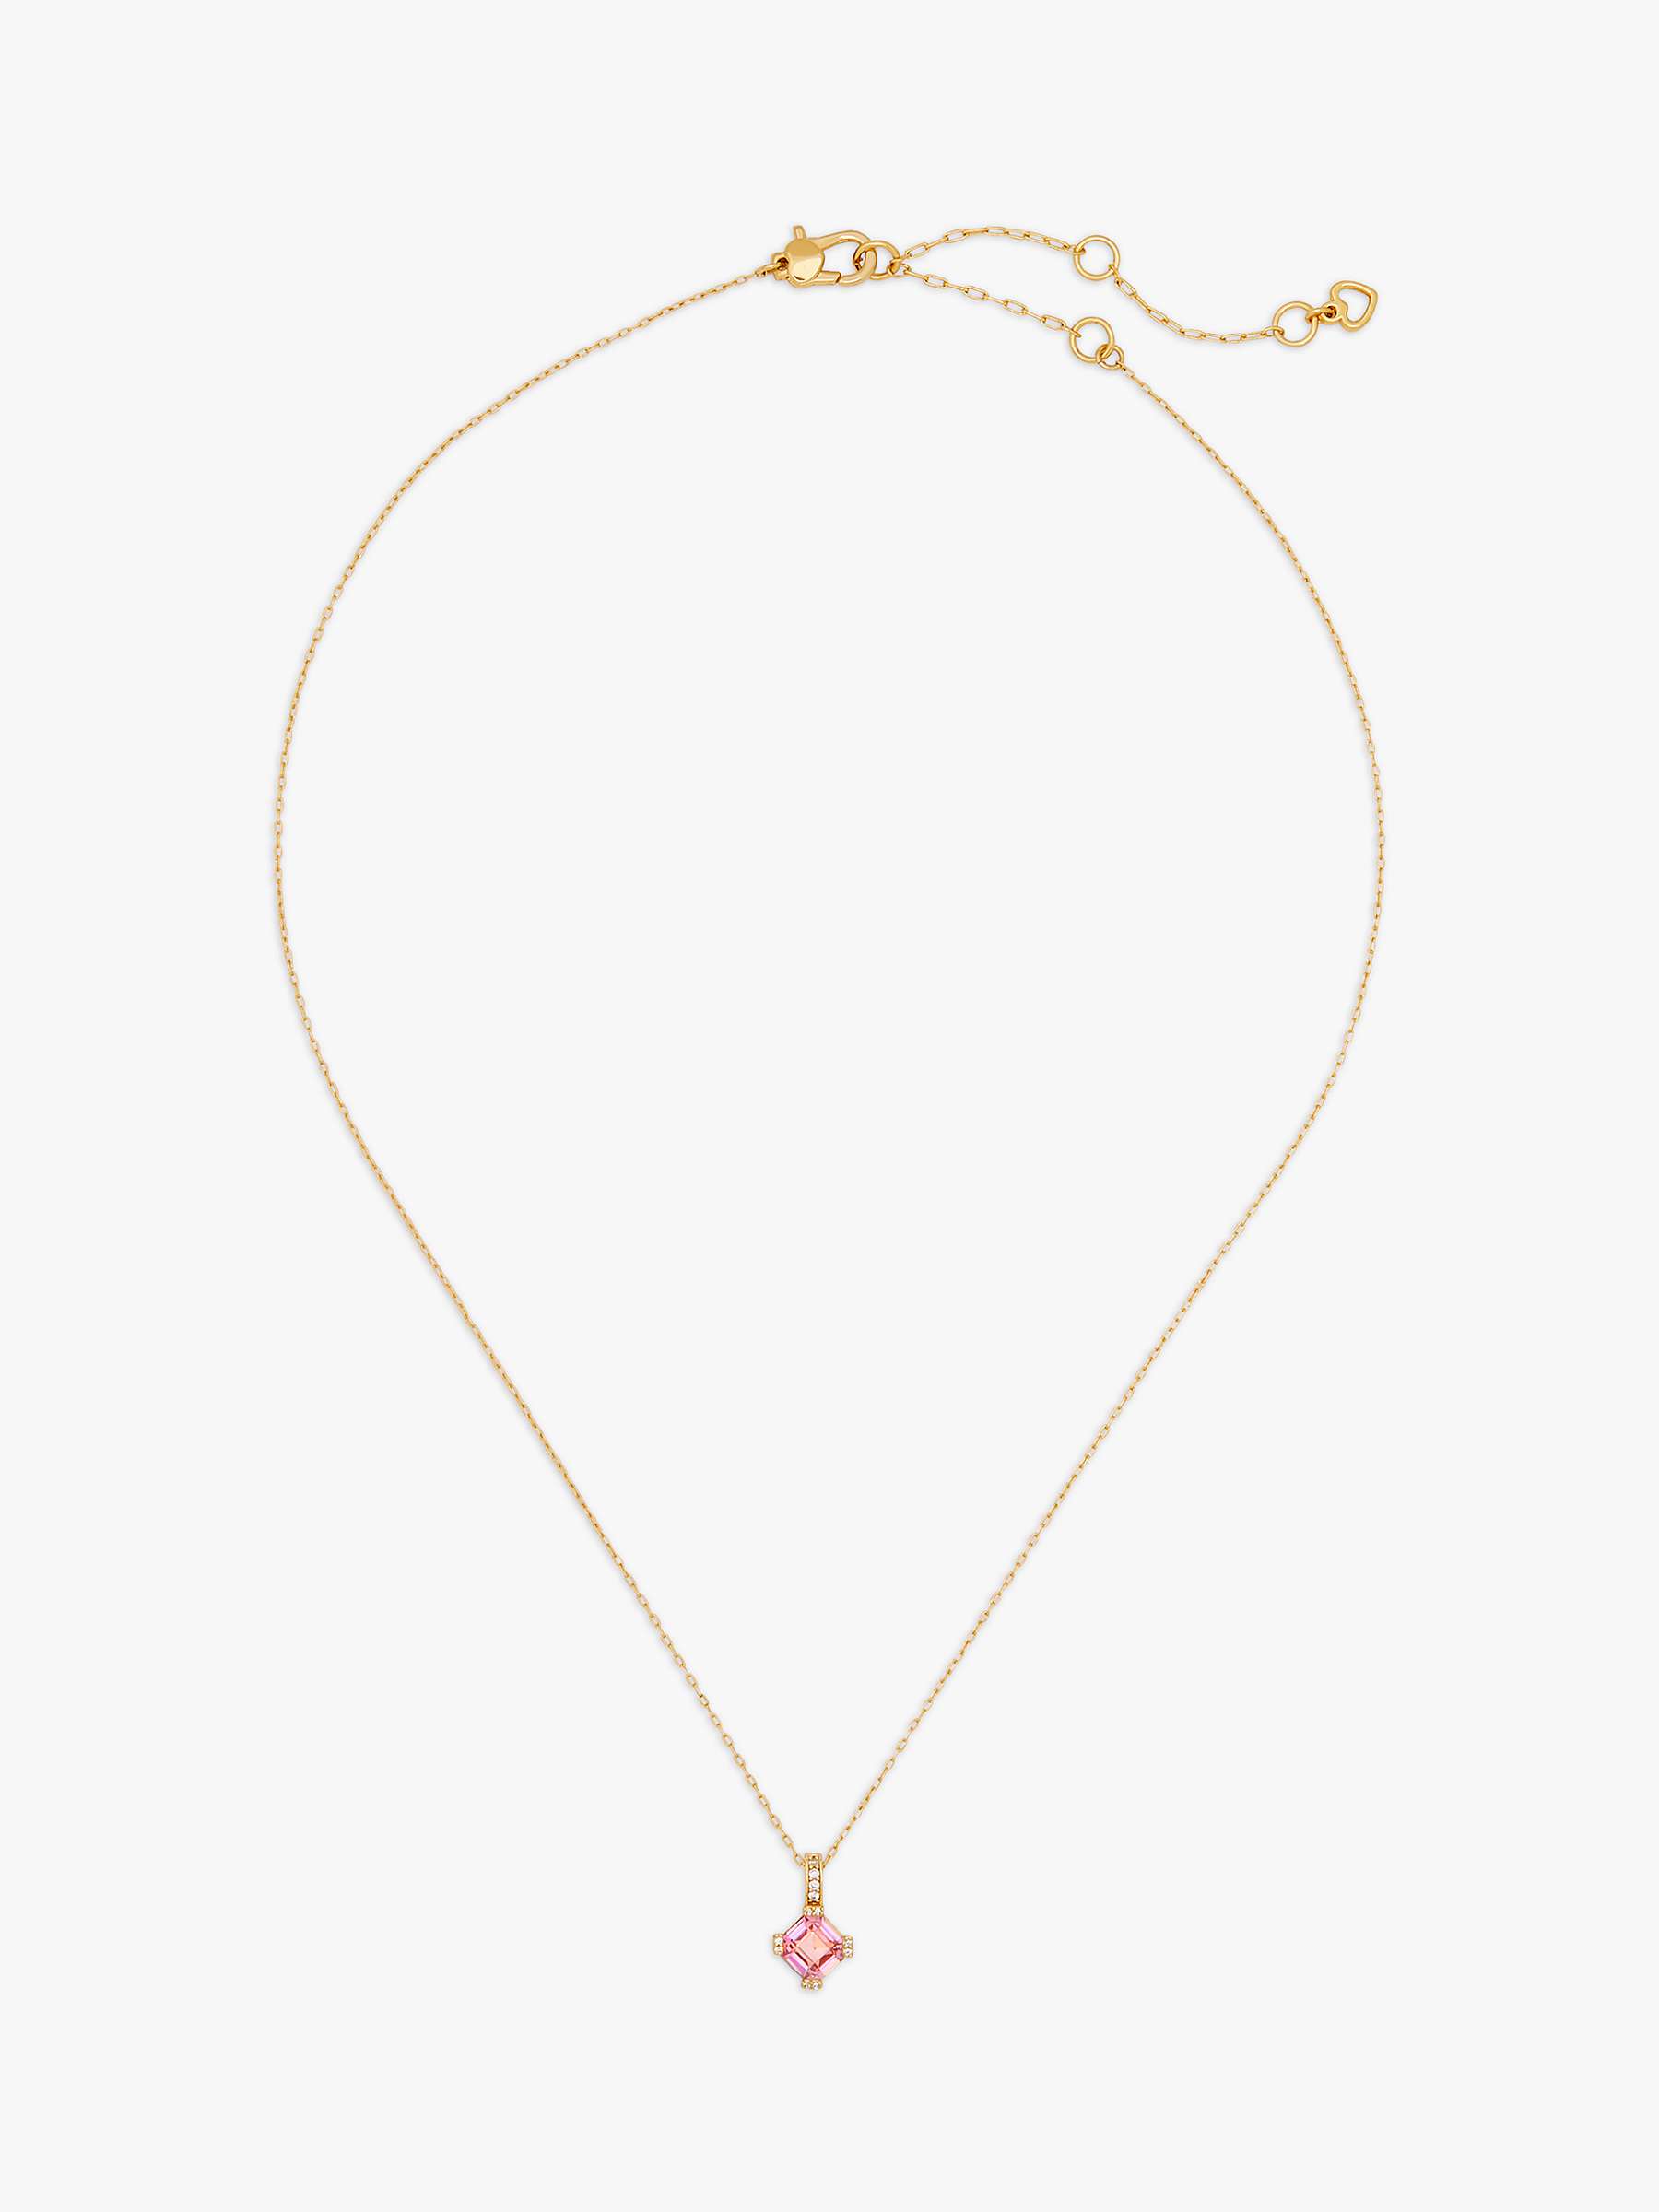 kate spade new york Daz Cubic Zirconia Pendant Necklace, Gold/Pink at ...